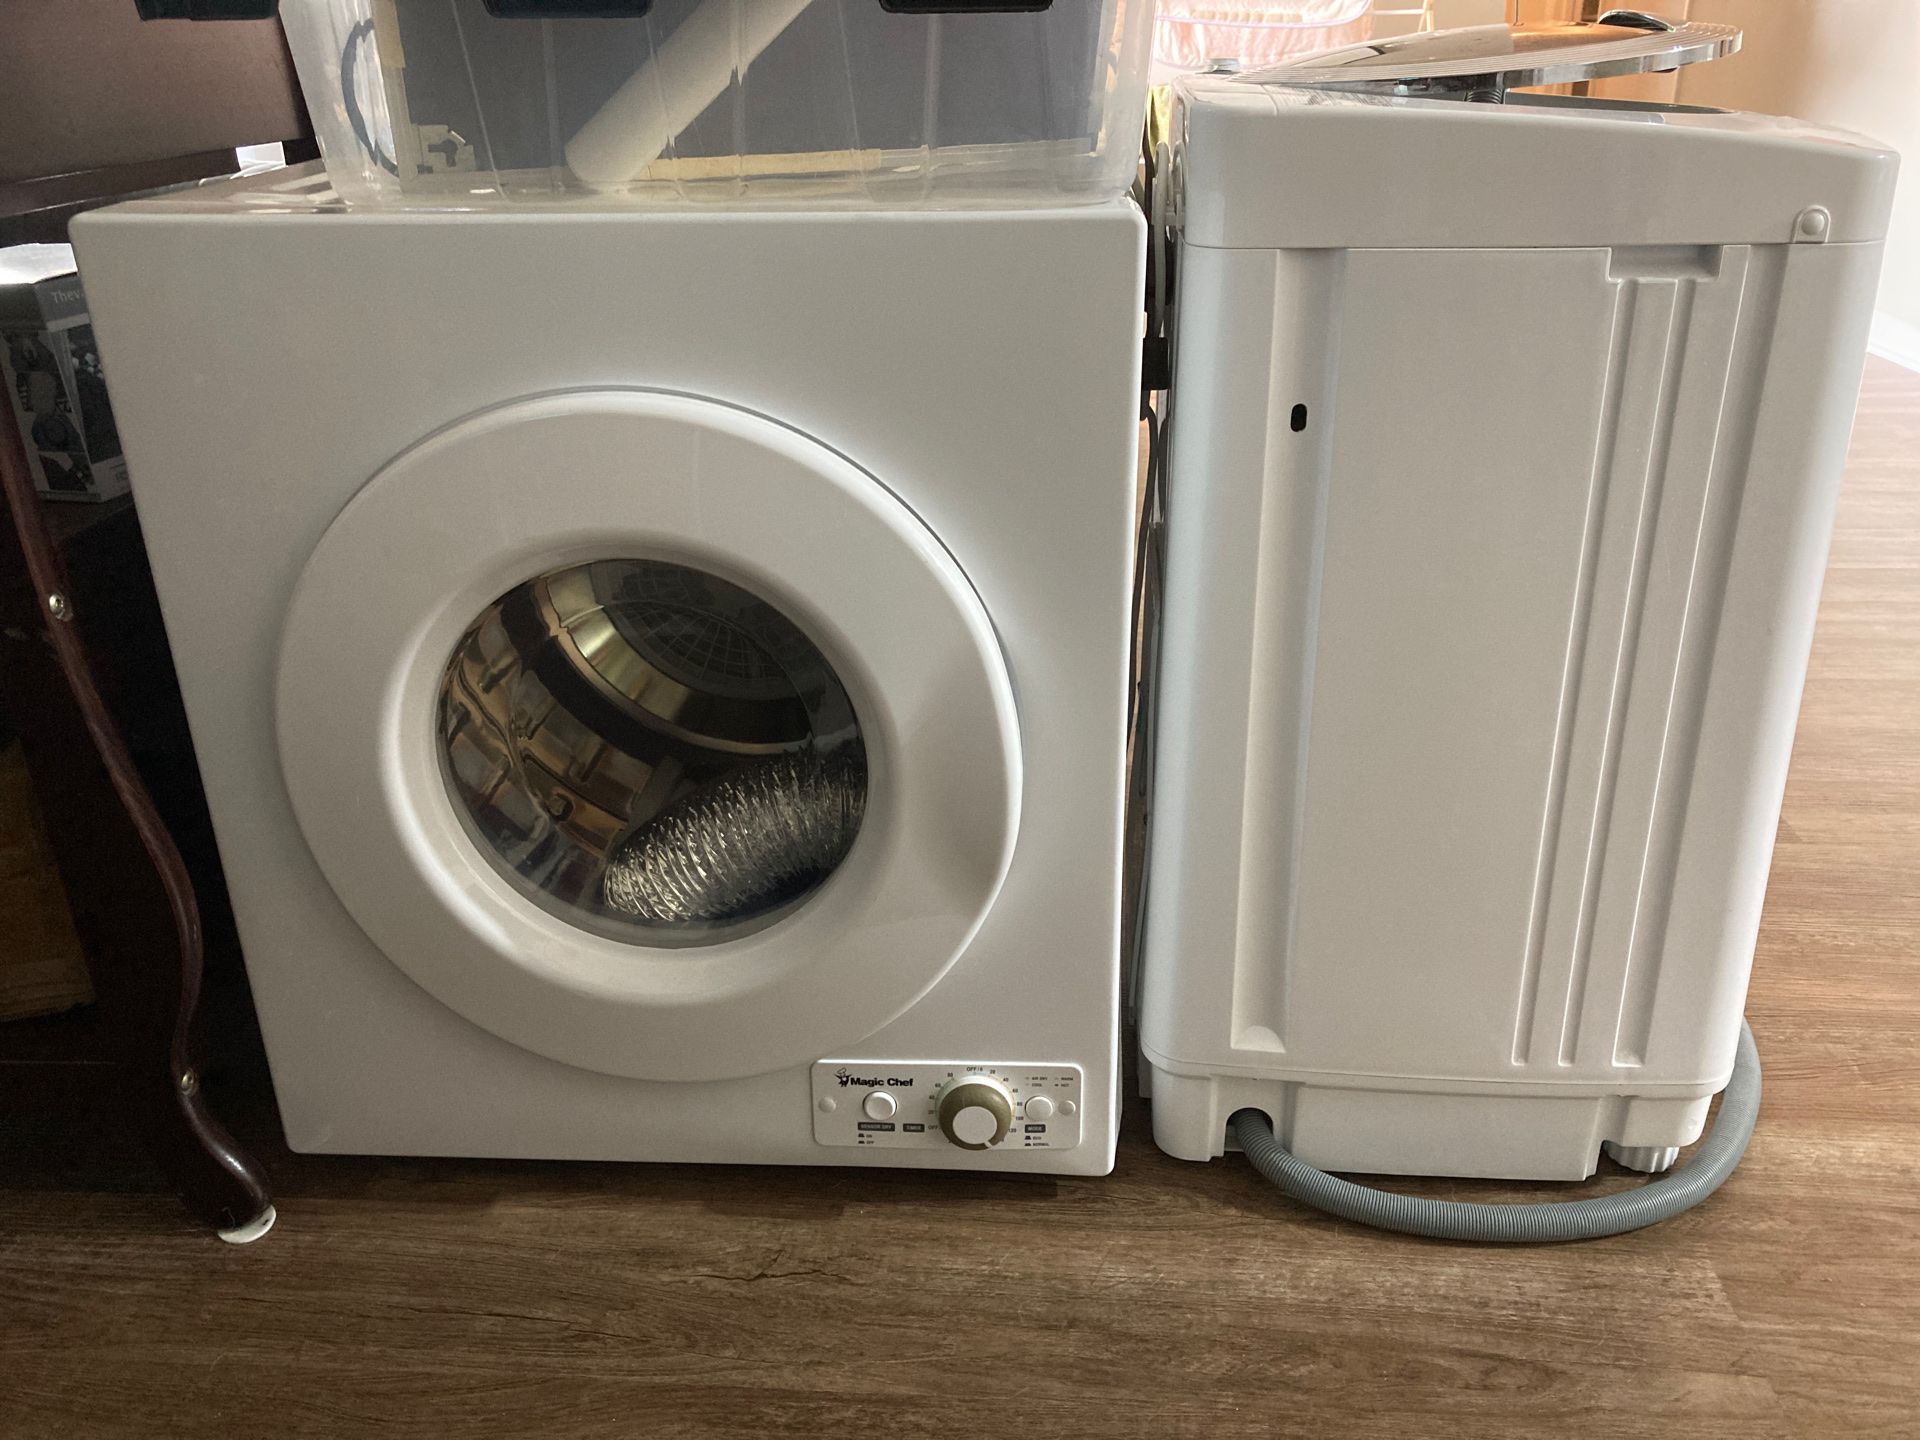 Washer and dryer set $360